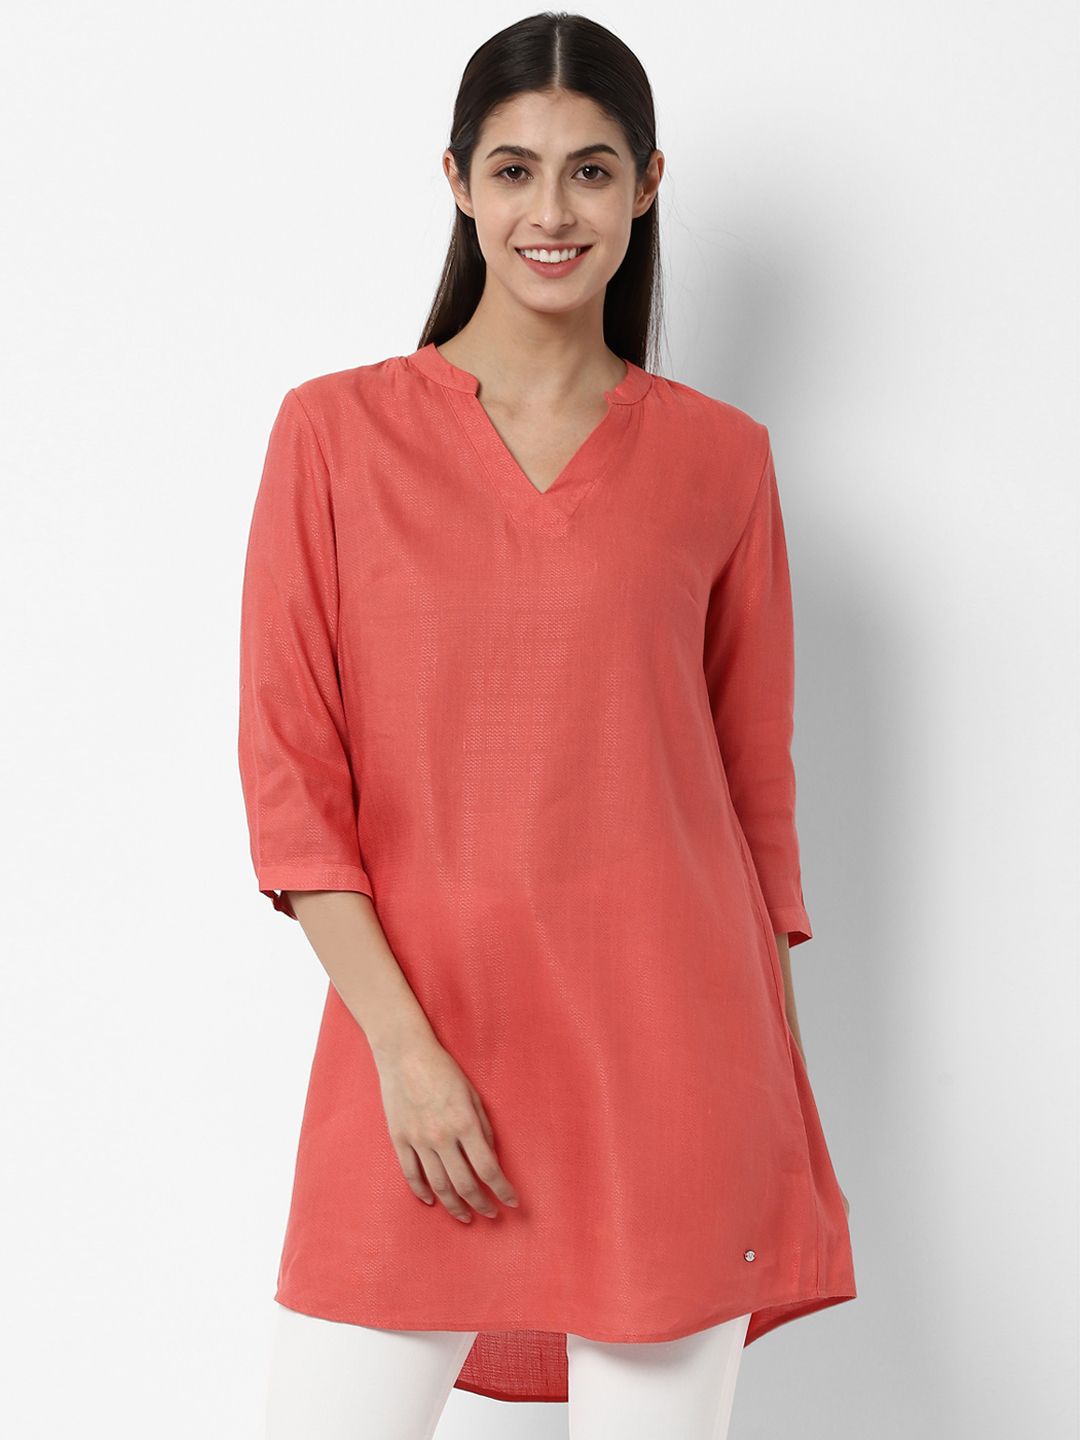 Allen Solly Woman Red Solid Linen Tunic Price in India